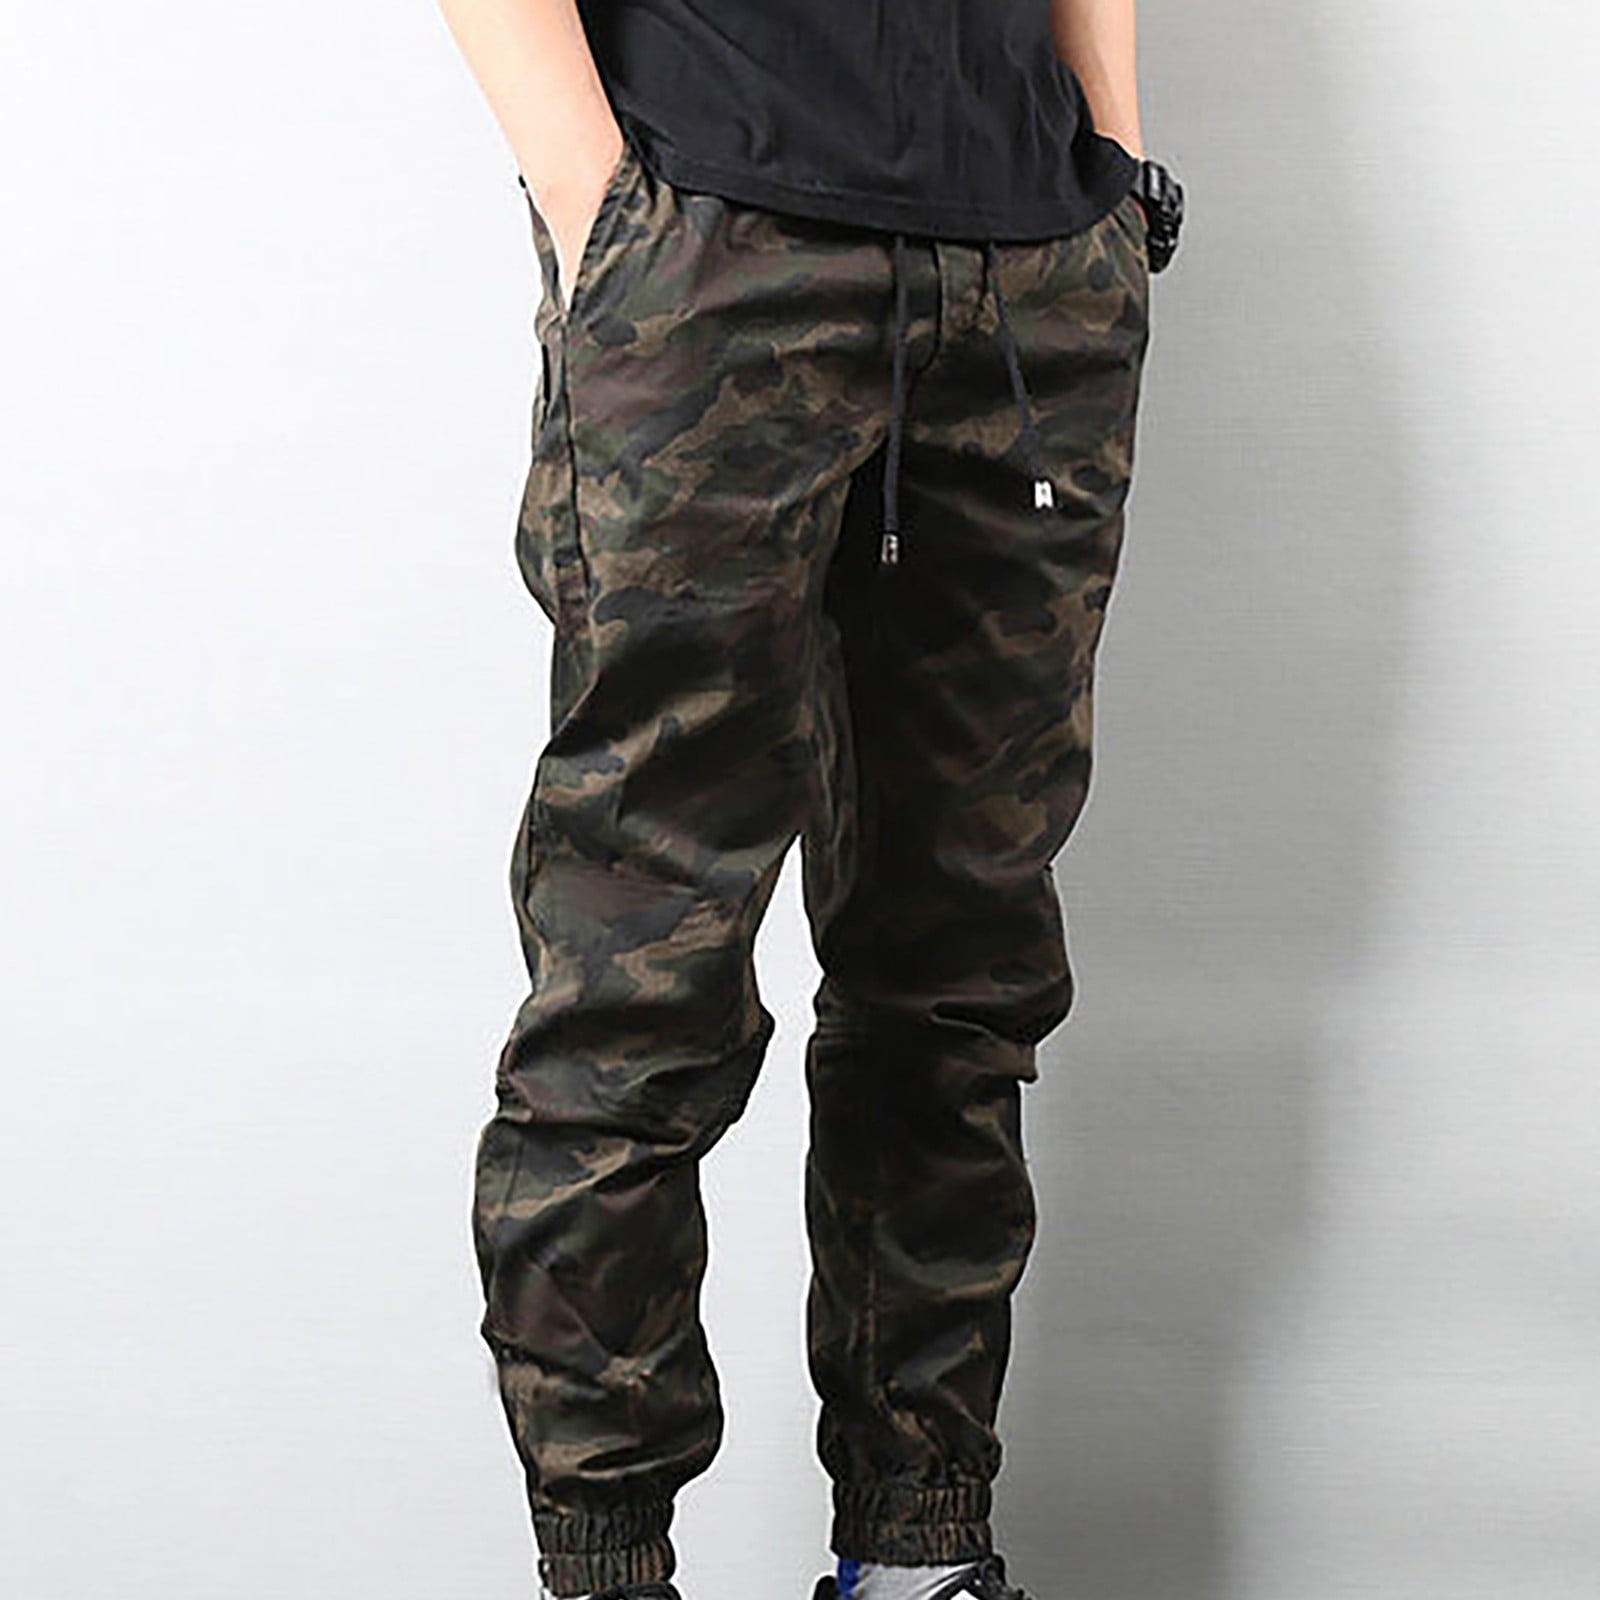 Faktura Begrænsninger reagere amidoa Men's Camouflage Cargo Pants Drawstring Elastic Waist Slacks with  Pockets Baggy Casual Work Tapered Trousers - Walmart.com